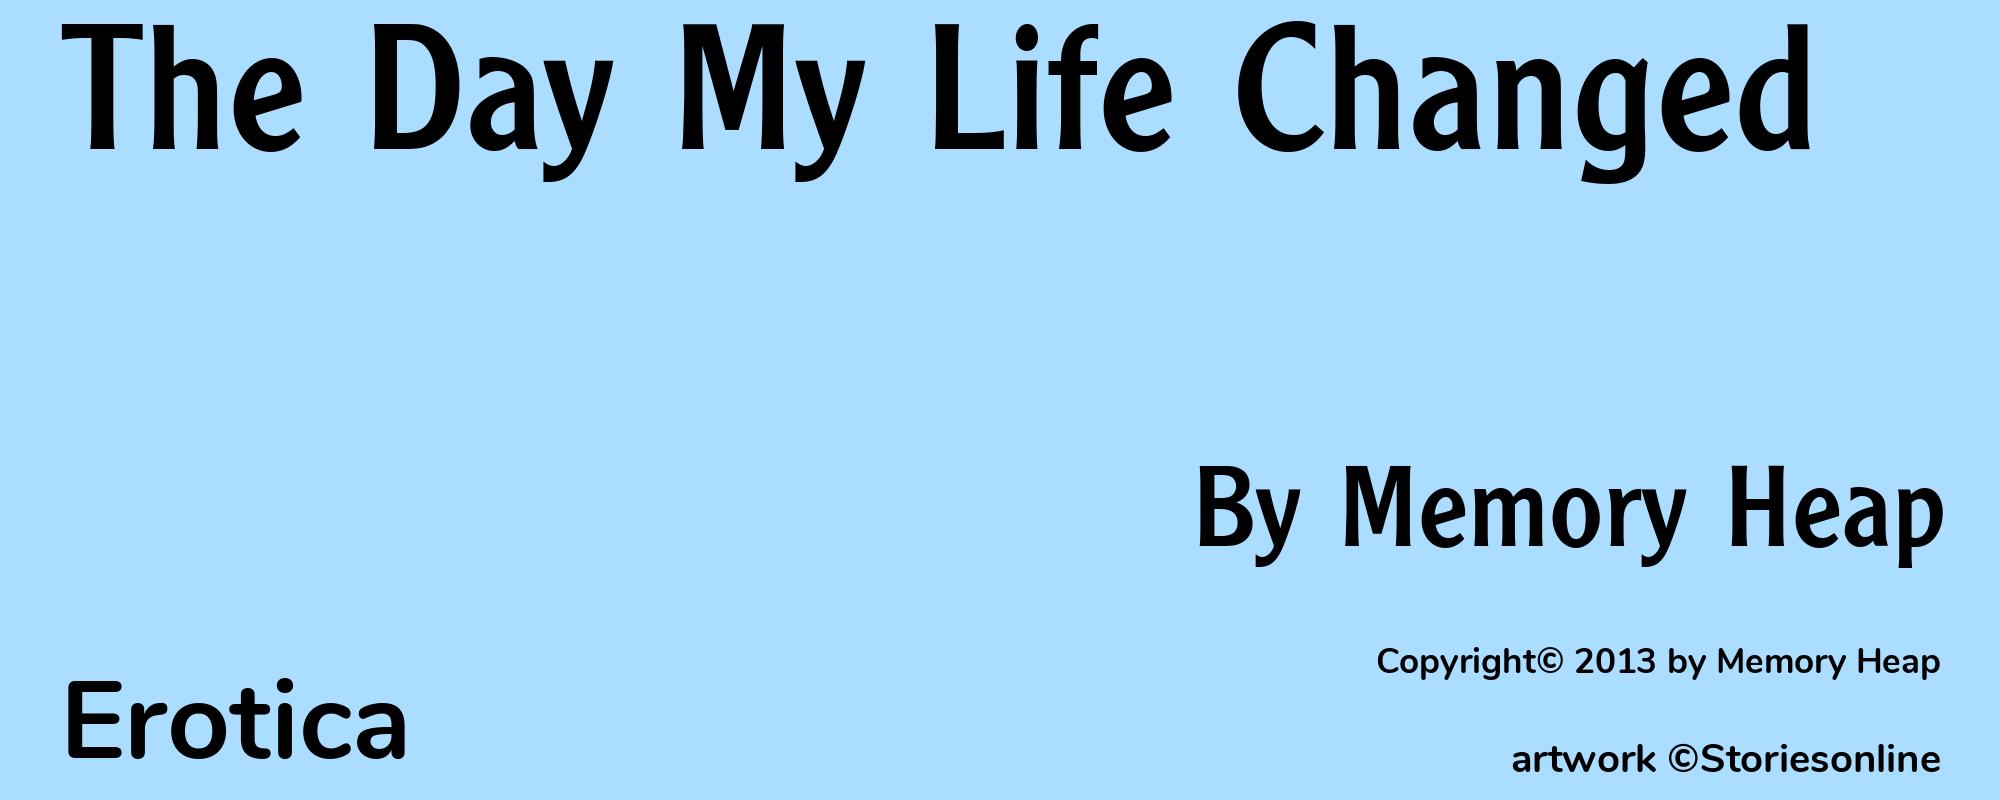 The Day My Life Changed - Cover